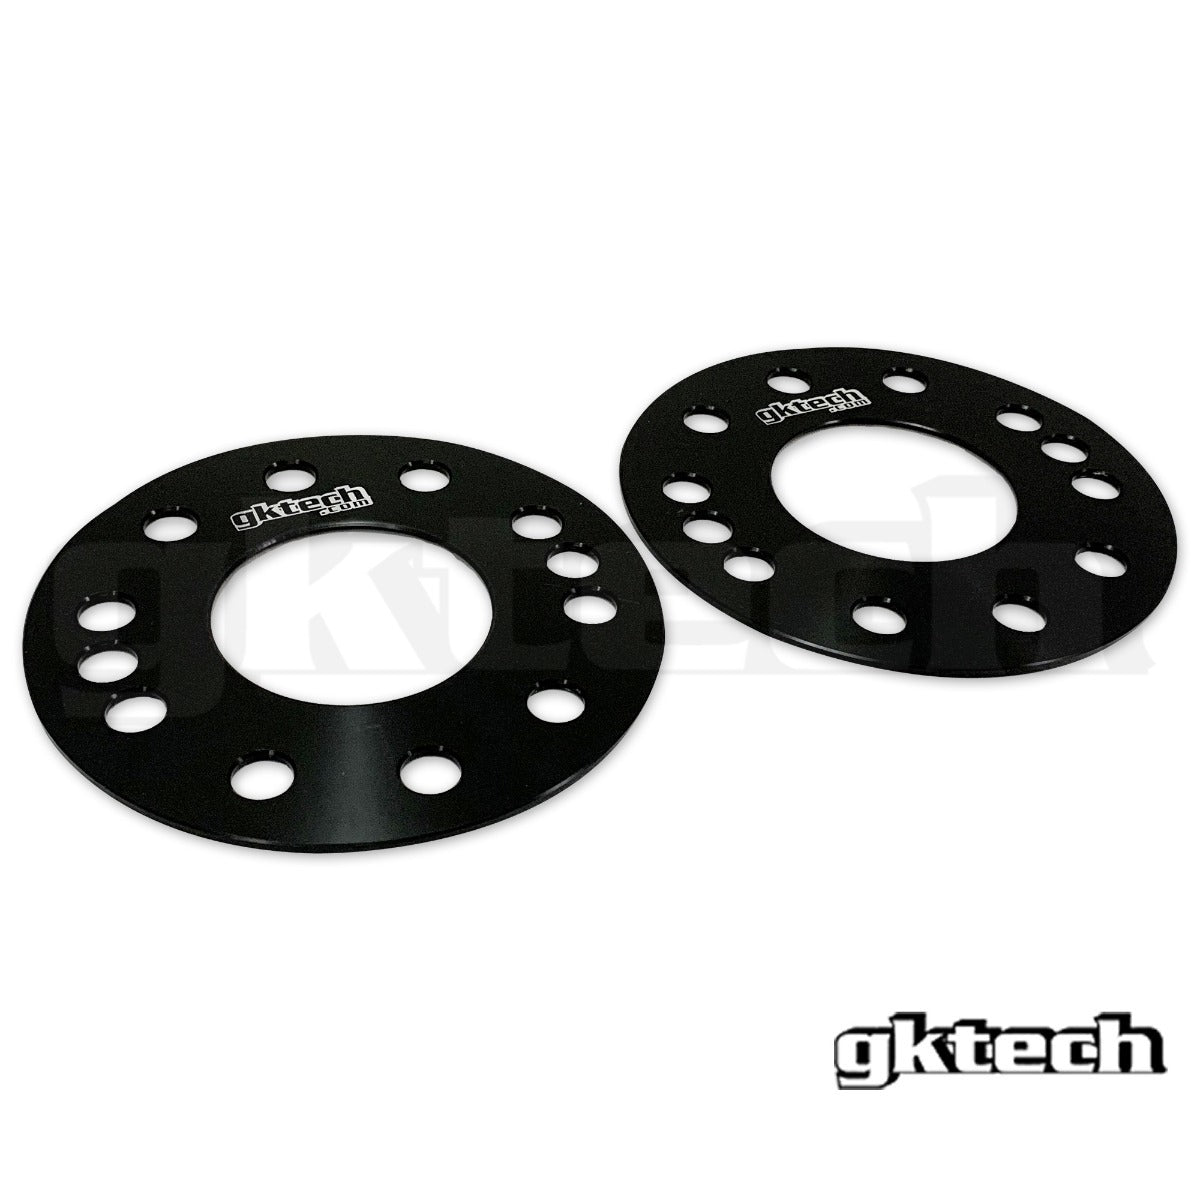 Wheel Adapters, Wheel Spacers, Hub Rings for your car!